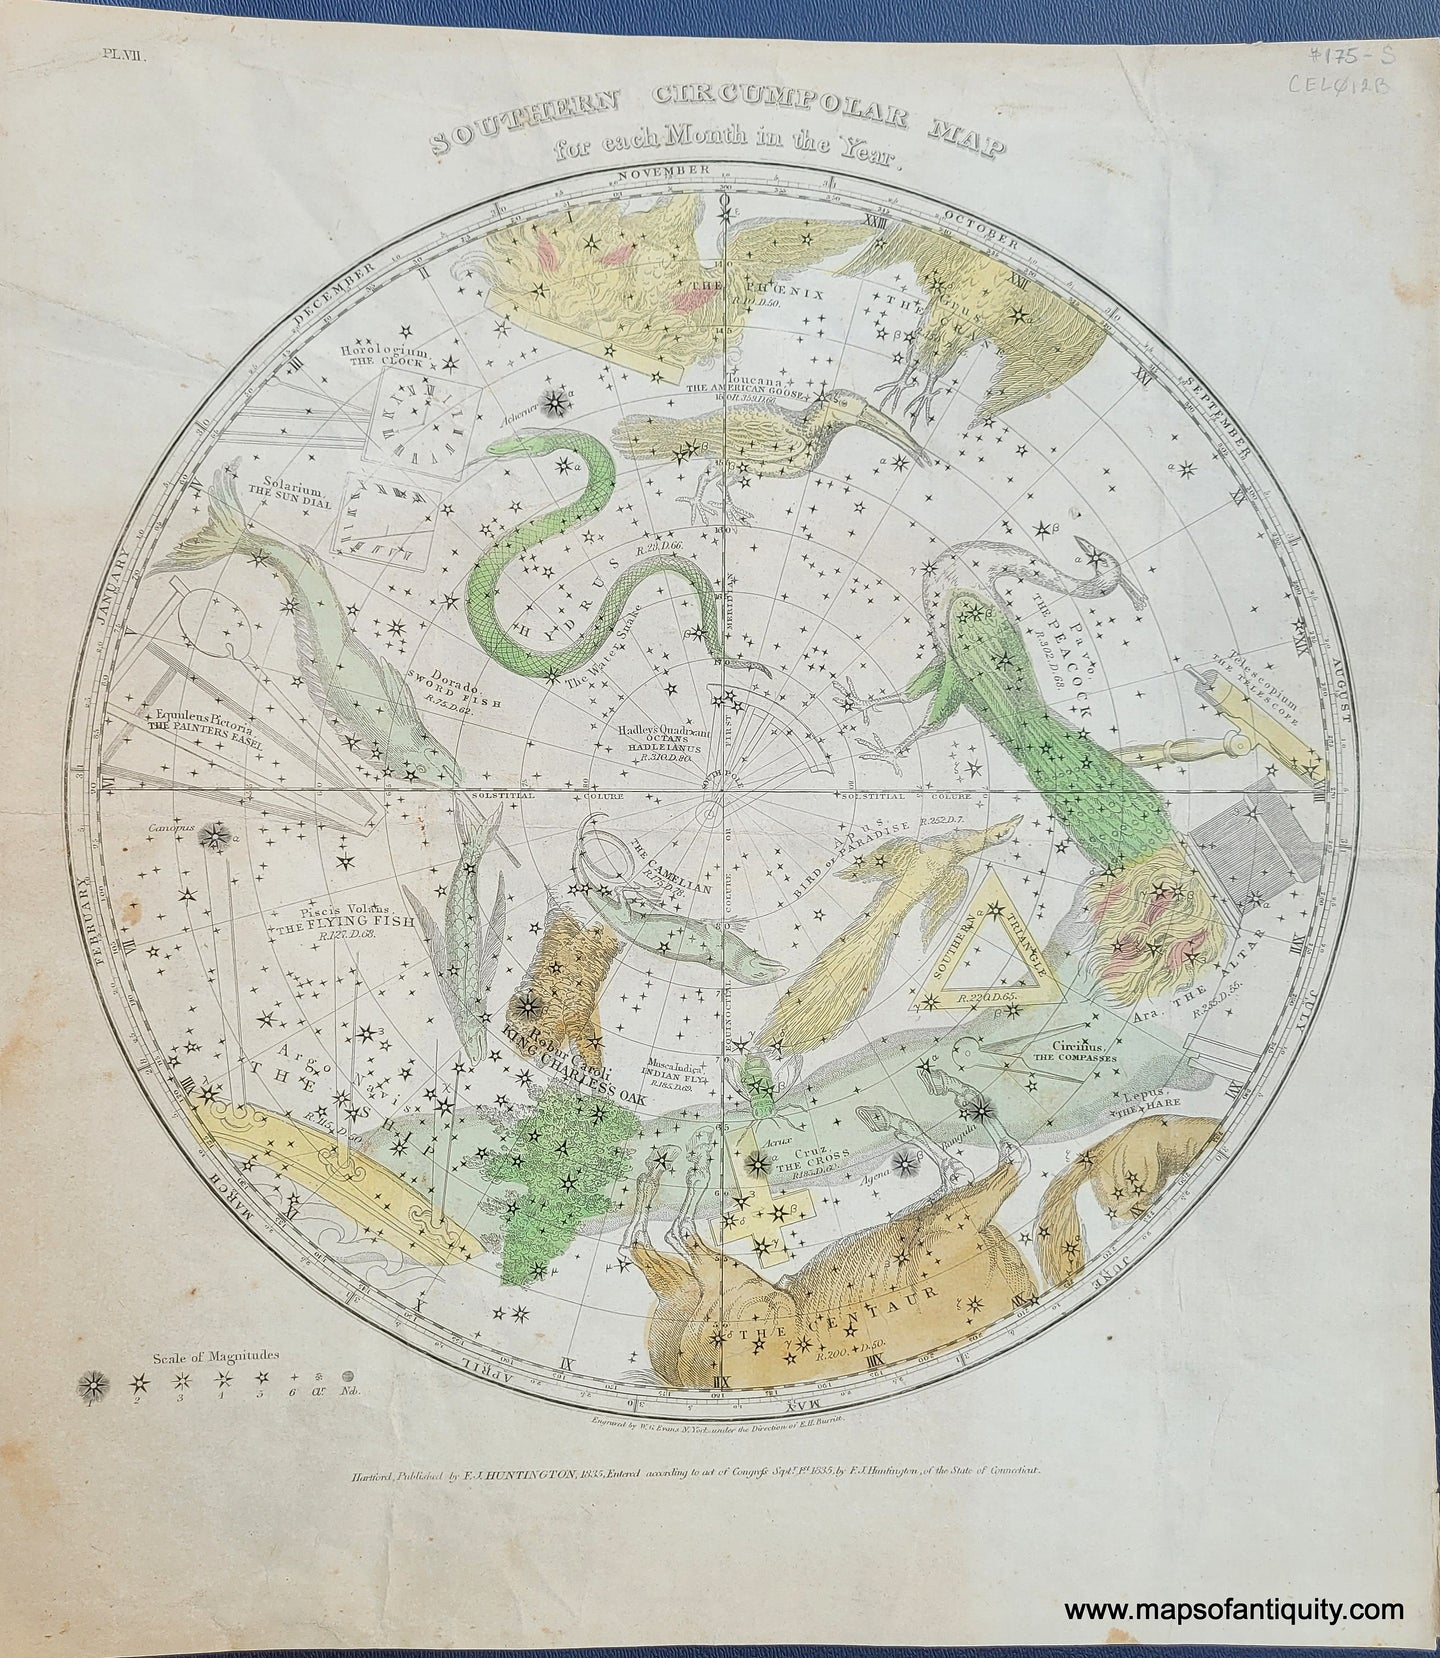 Southern-Circumpolar-Map-for-each-Month-in-the-Year-Antique-Celestial-Stars-Constellations-Burritt-Atlas-1835-1830s-1800s-19th-century-Maps-of-Antiquity